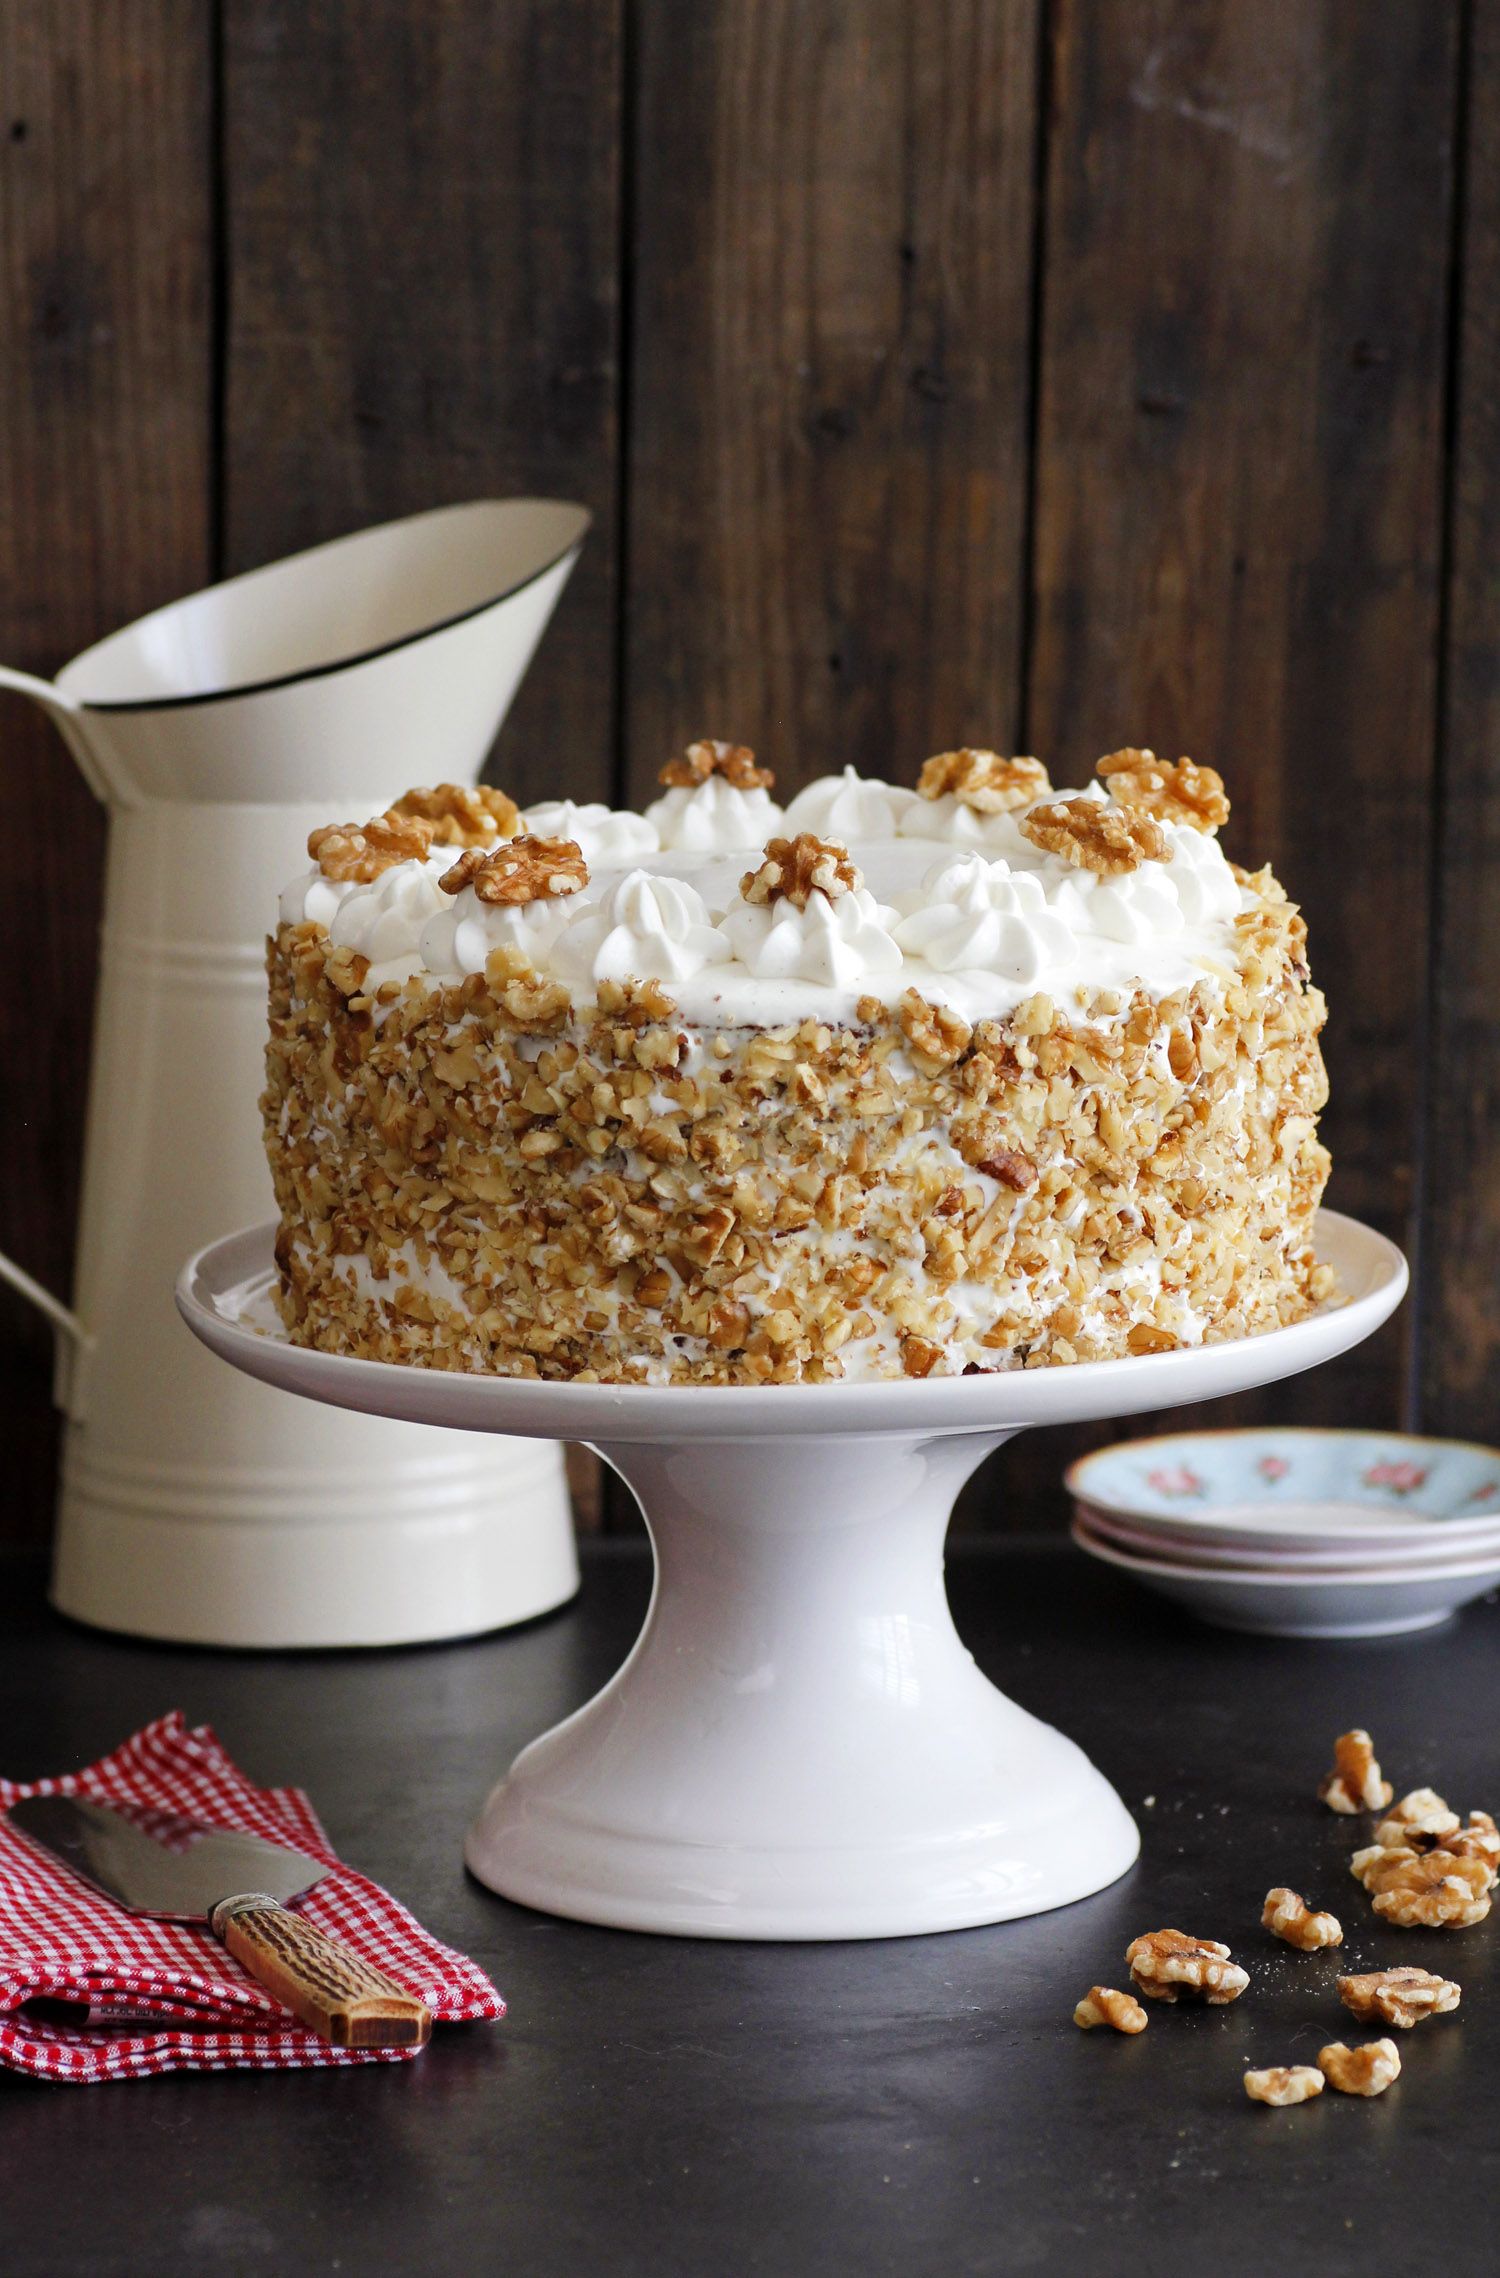 Best-Ever Buttermilk Carrot Cake • The Crumby Kitchen